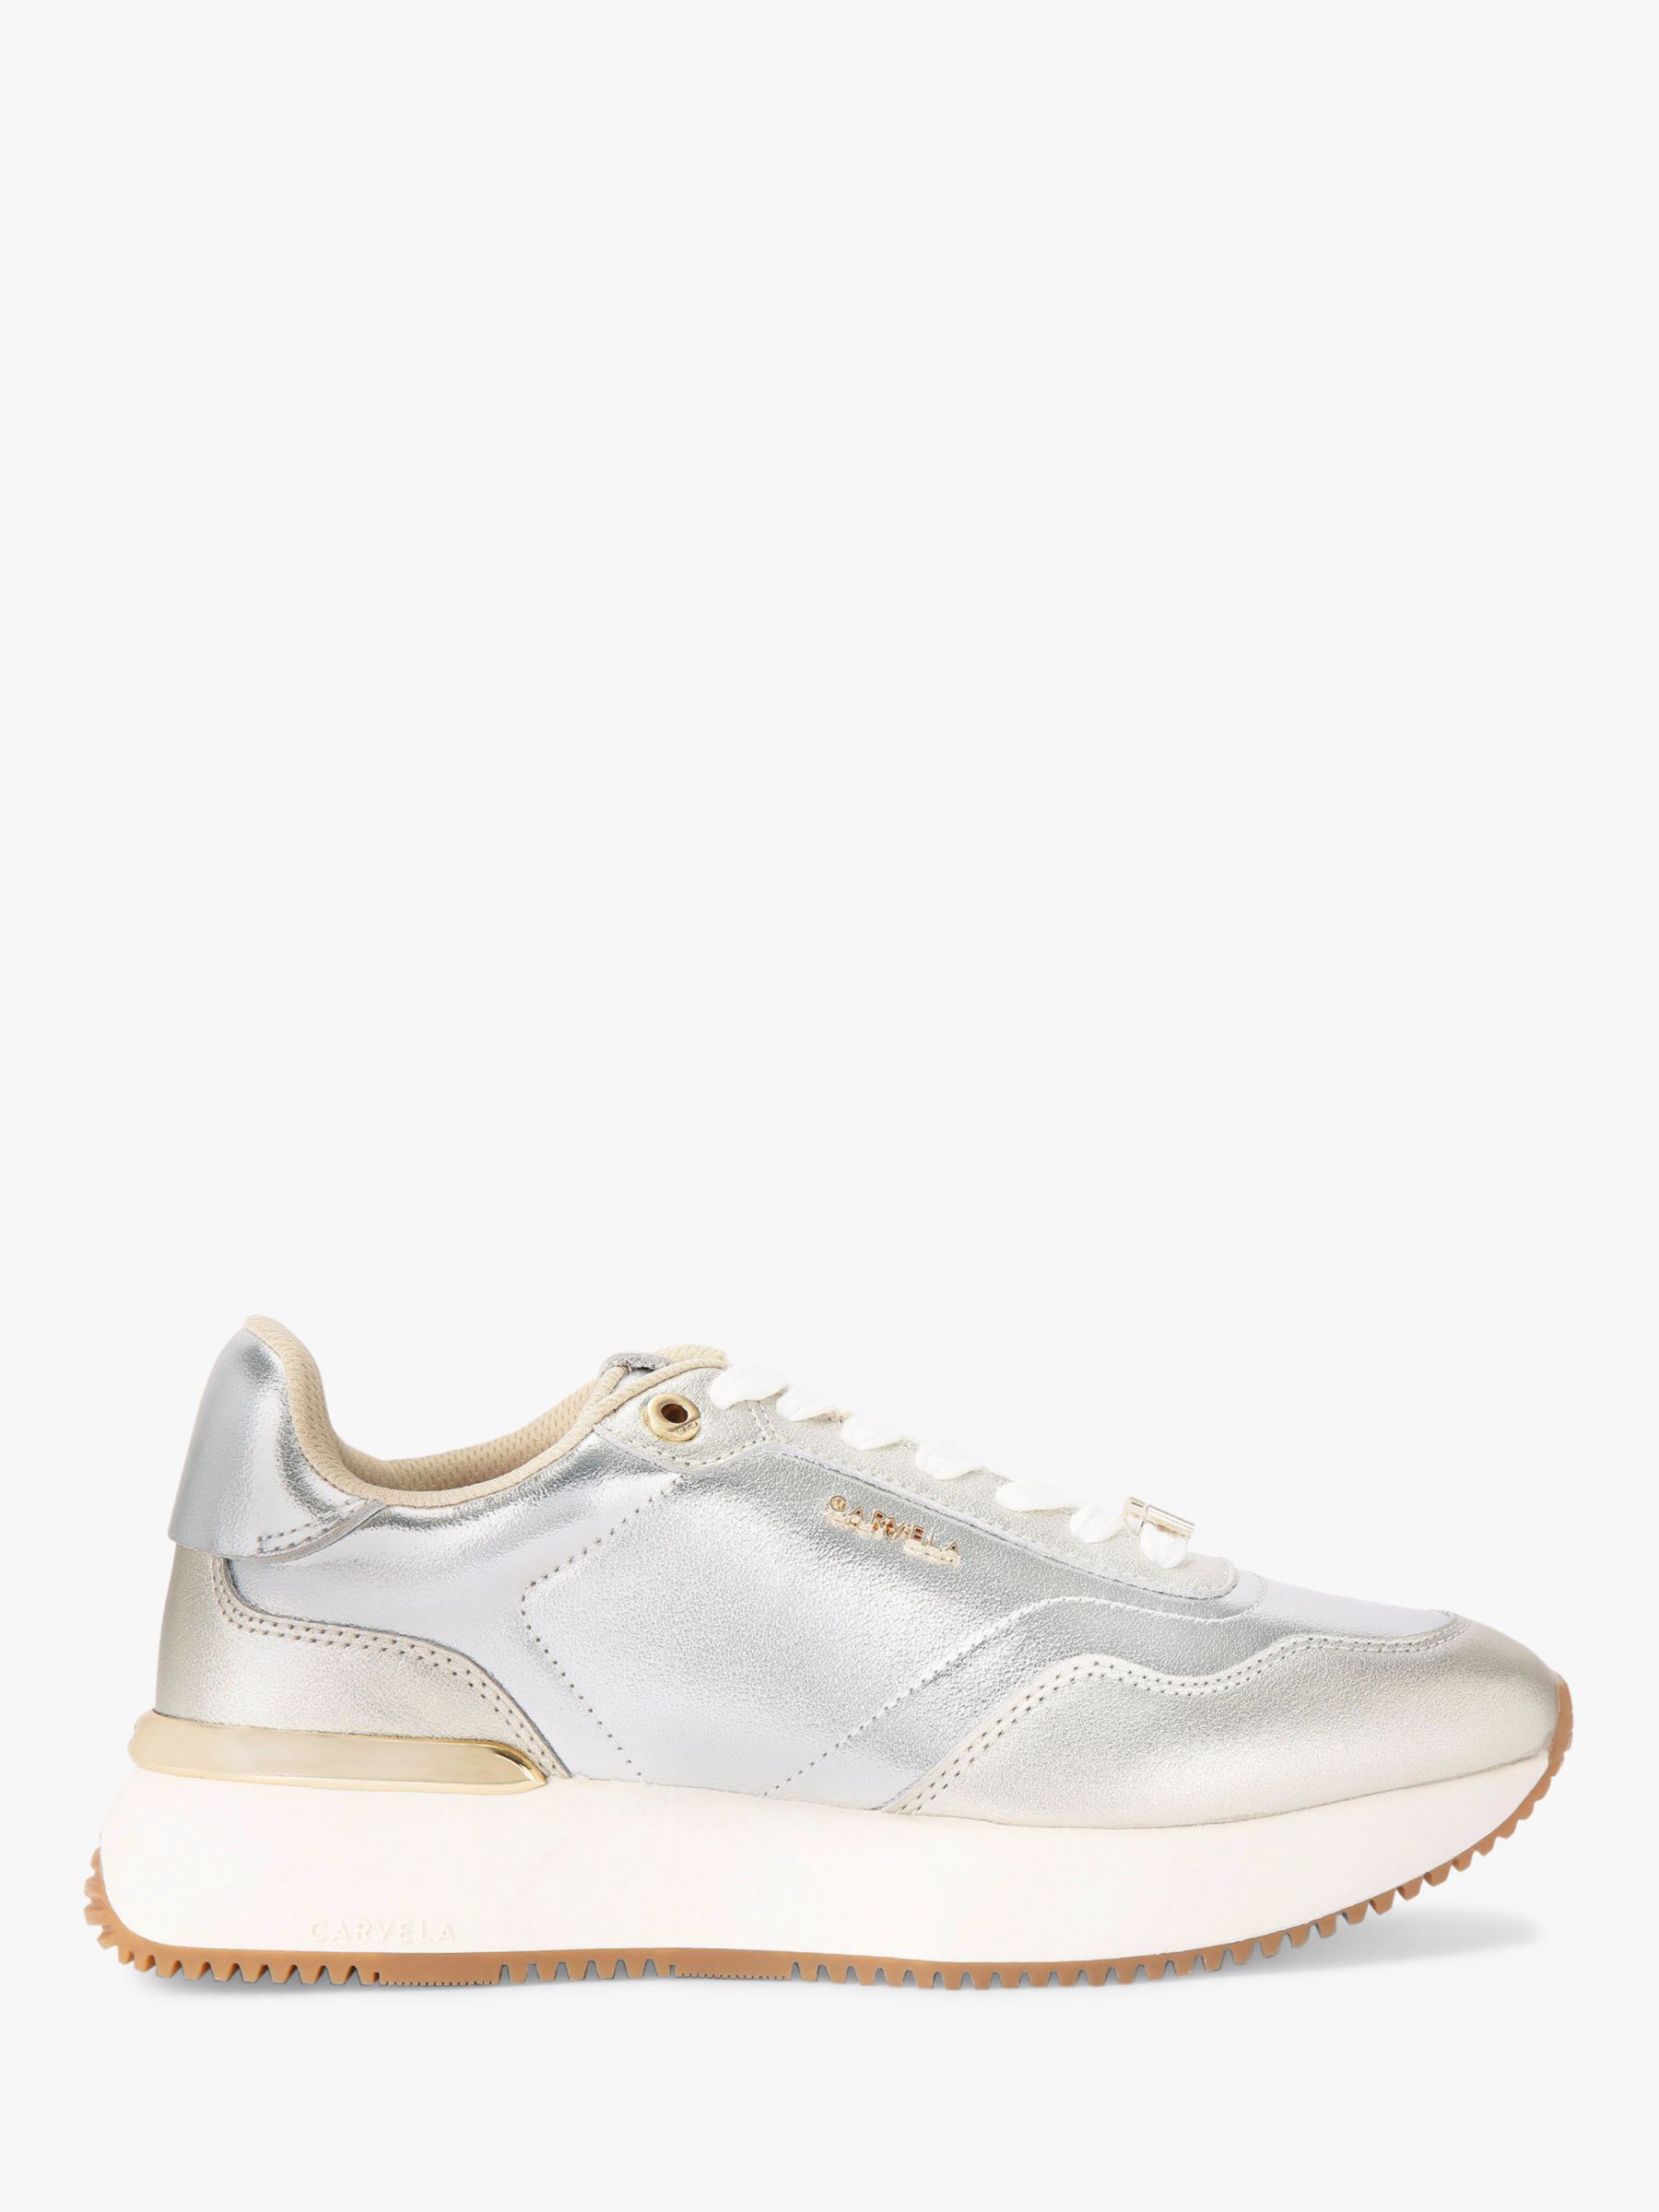 Carvela Flare Leather Trainers, Silver Multi Silver at John Lewis ...